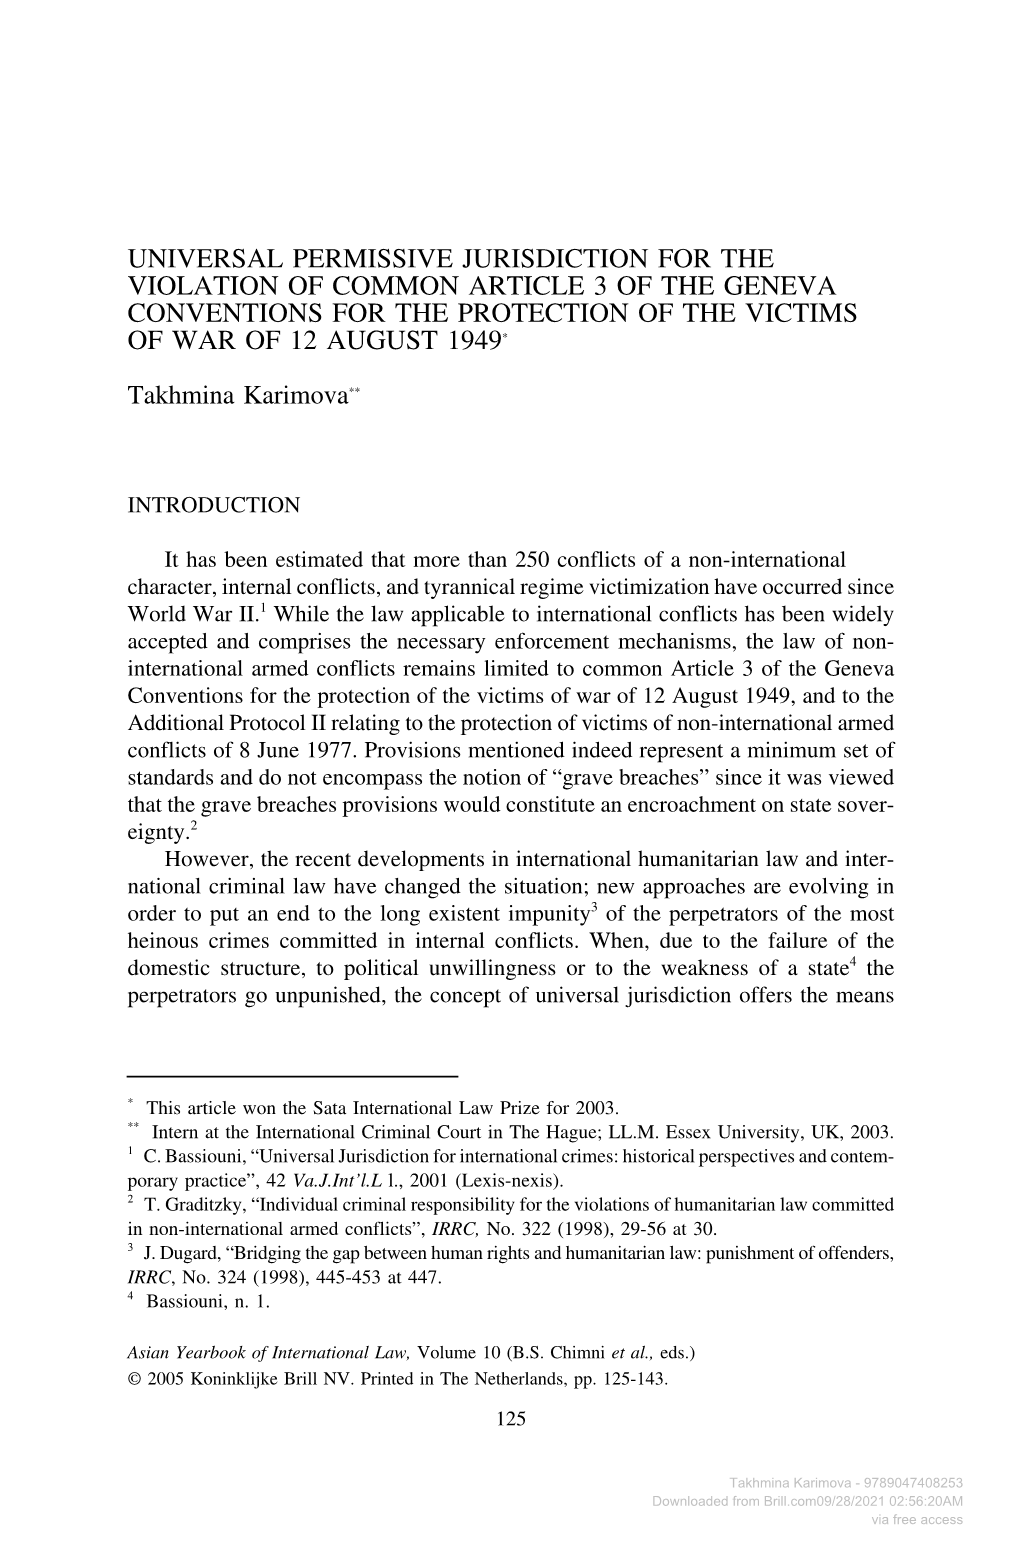 Universal Permissive Jurisdiction for the Violation of Common Article 3 of the Geneva Conventions for the Protection of the Victims of War of 12 August 1949*